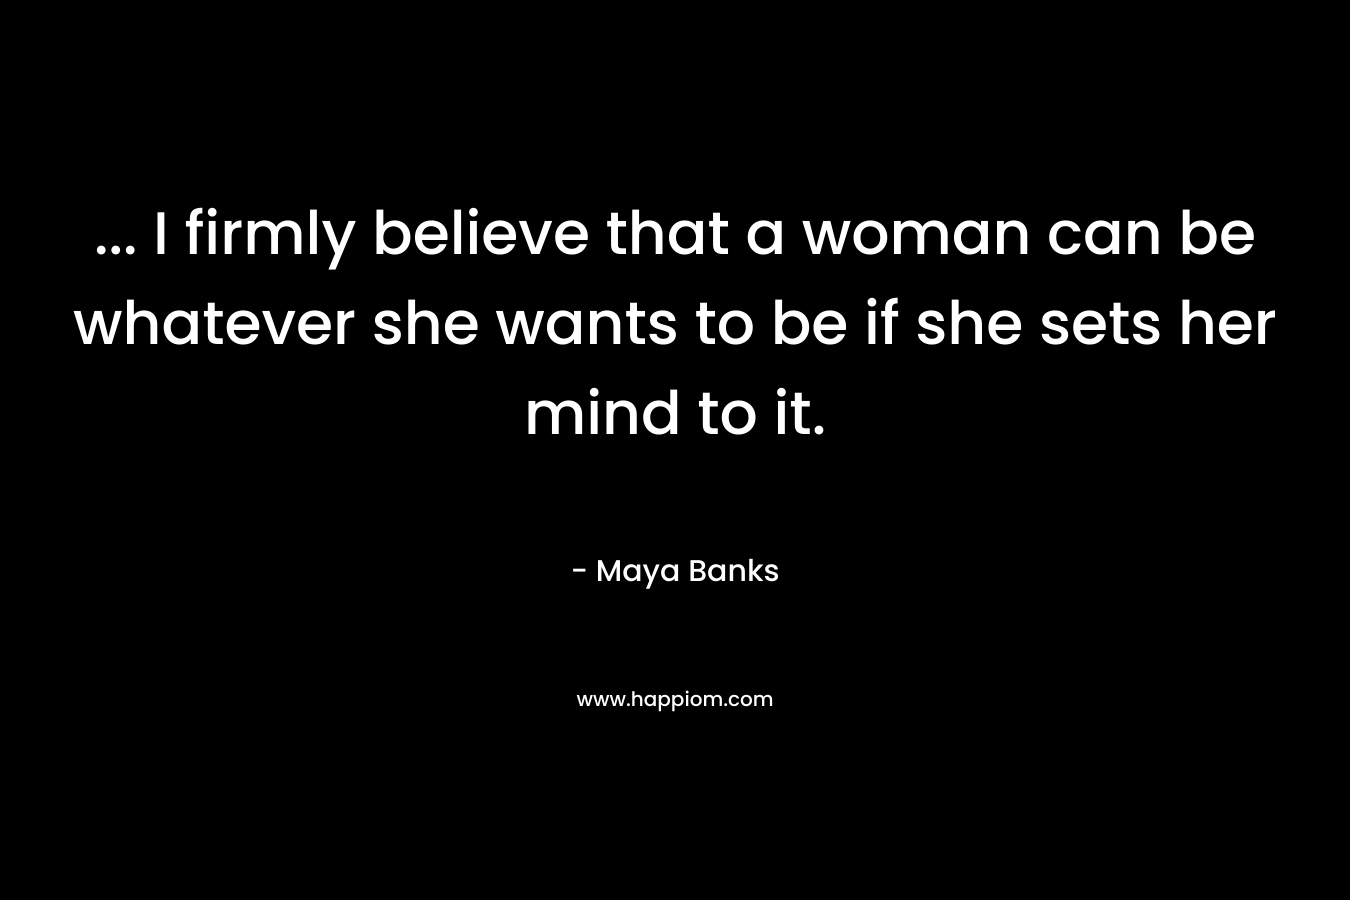 ... I firmly believe that a woman can be whatever she wants to be if she sets her mind to it.